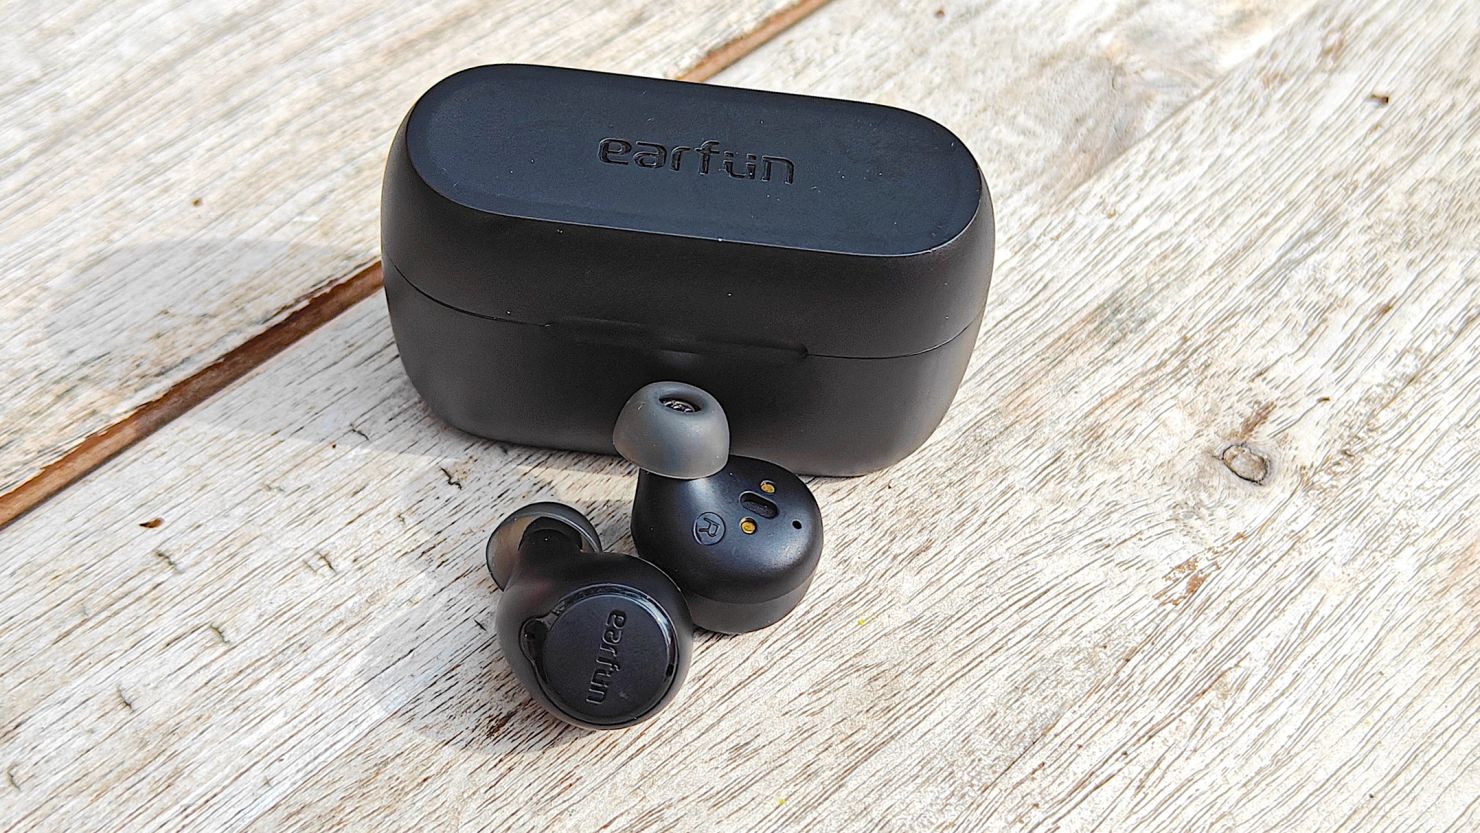 The EarFun Free 2S earbuds and their case on a wooden surface.